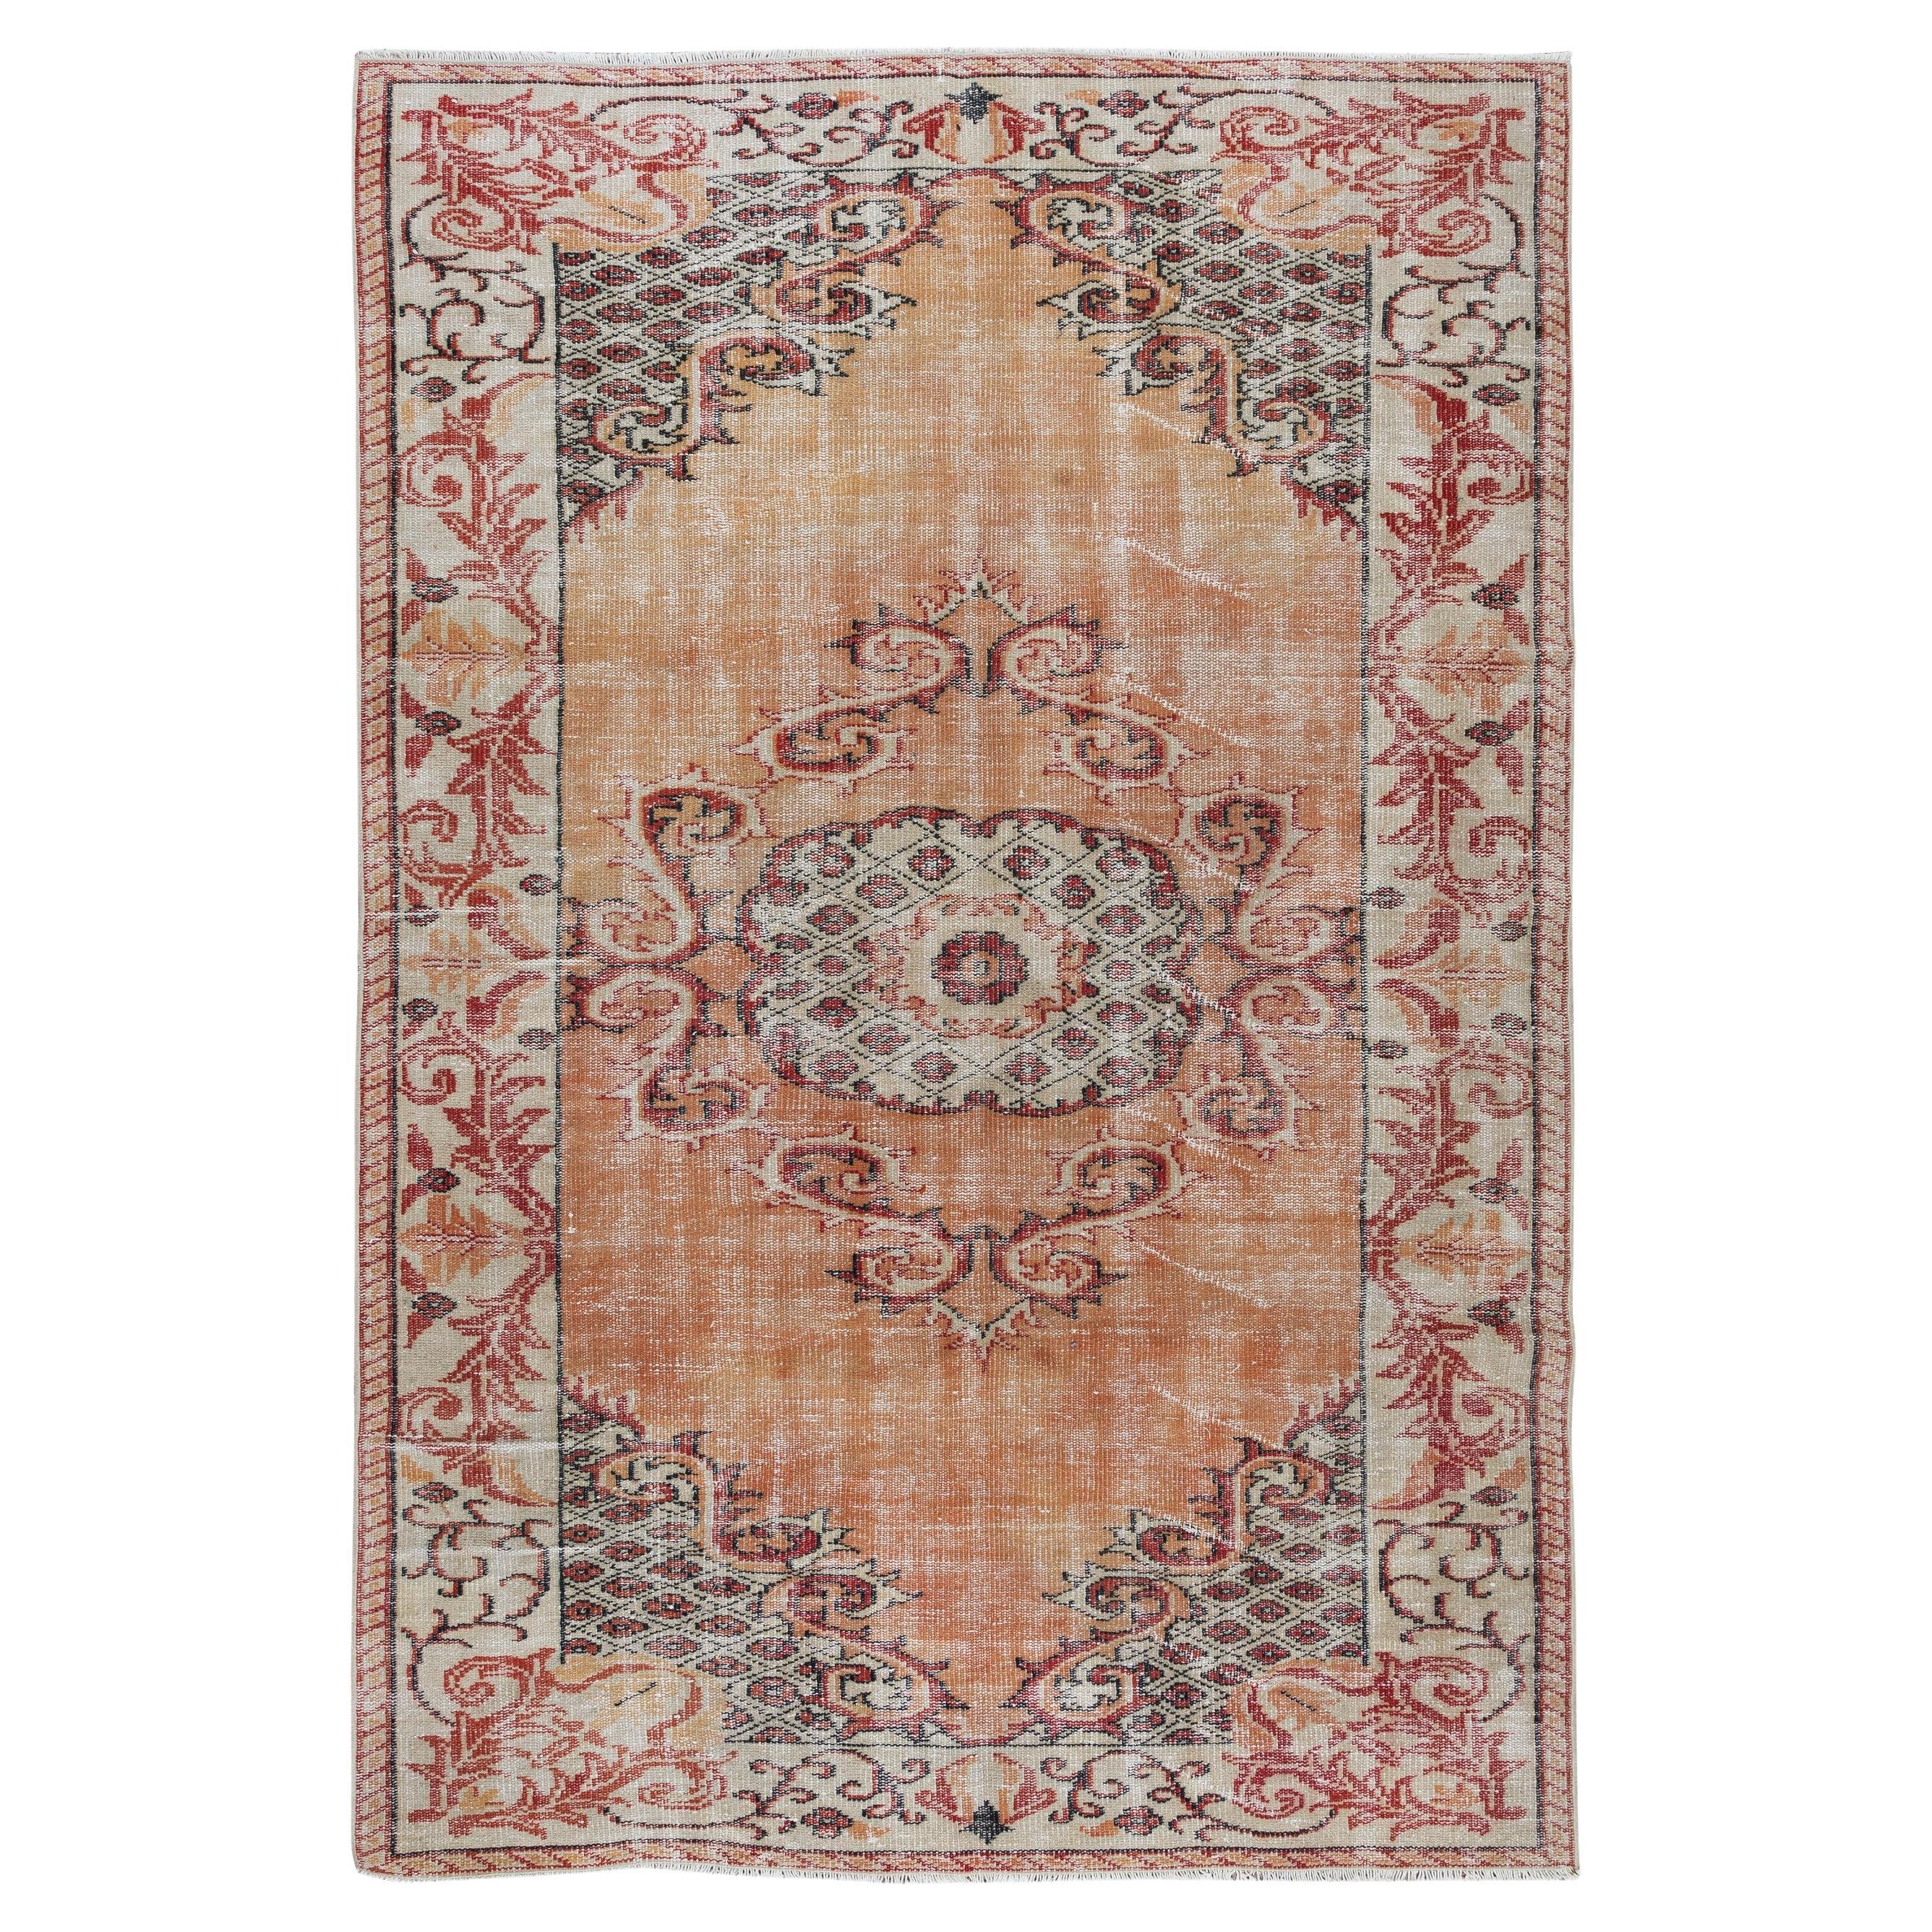 6x8.7 Ft Hand Knotted Orange Area Rug, Vintage Wool Carpet From Turkey For Sale